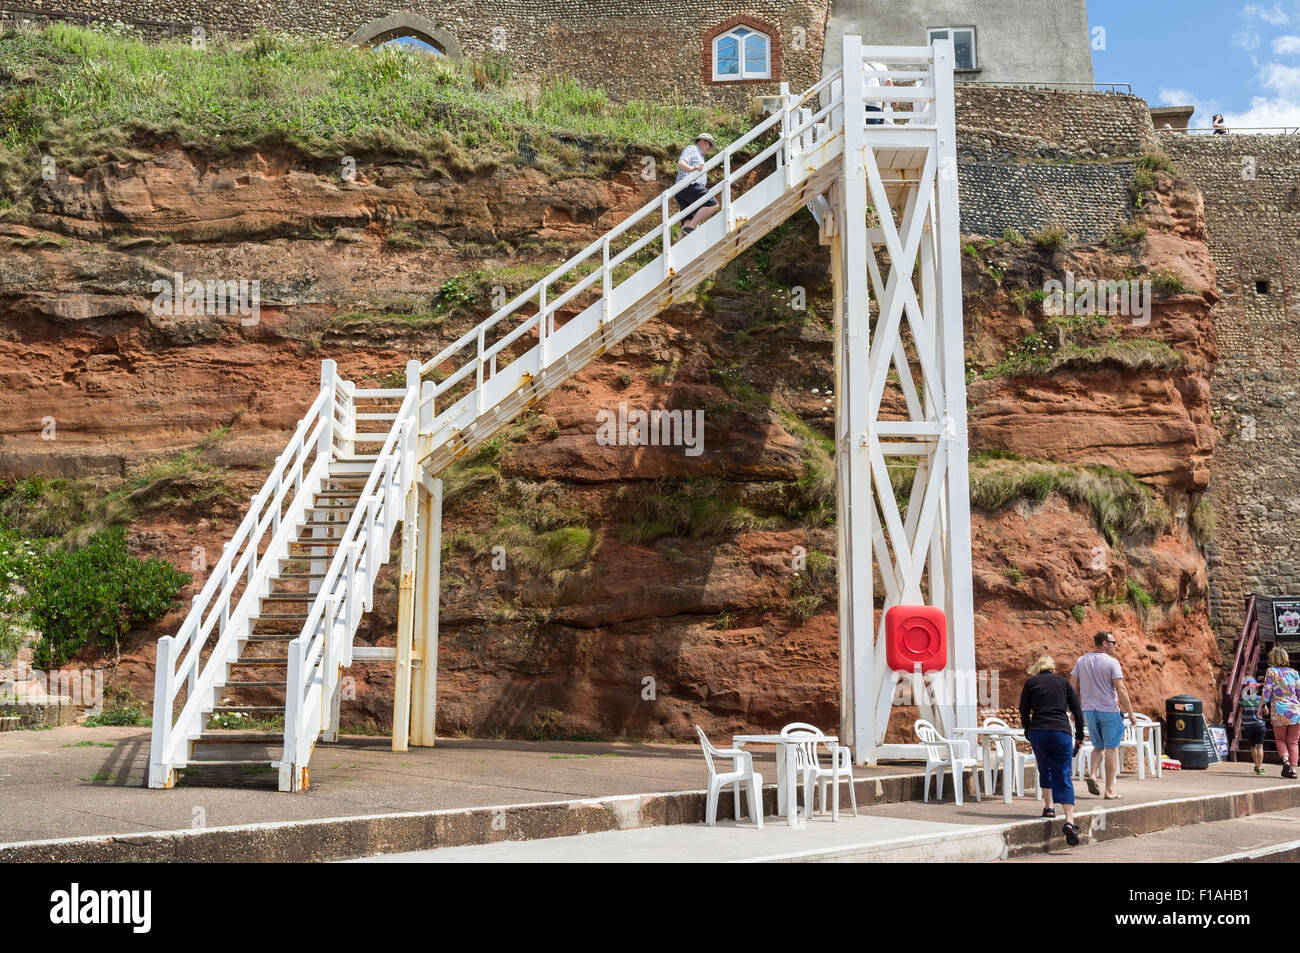 The unique Jacobs Ladder at Sidmouth in Devon. Stock Photo